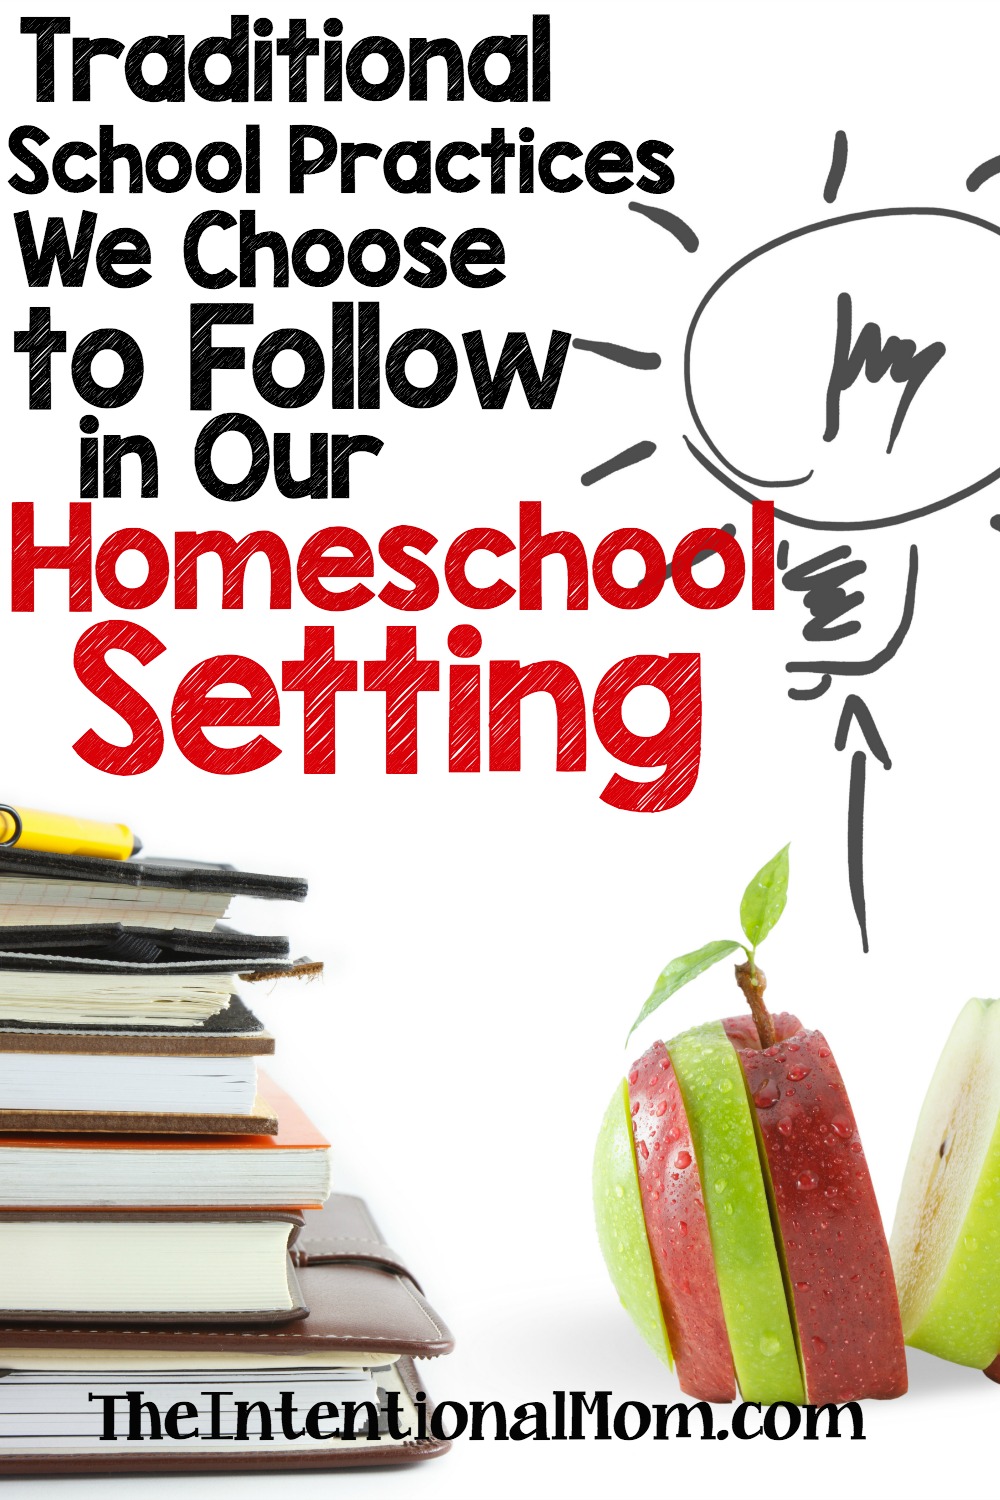 Traditional School Practices That We Choose to Follow in Our Homeschool